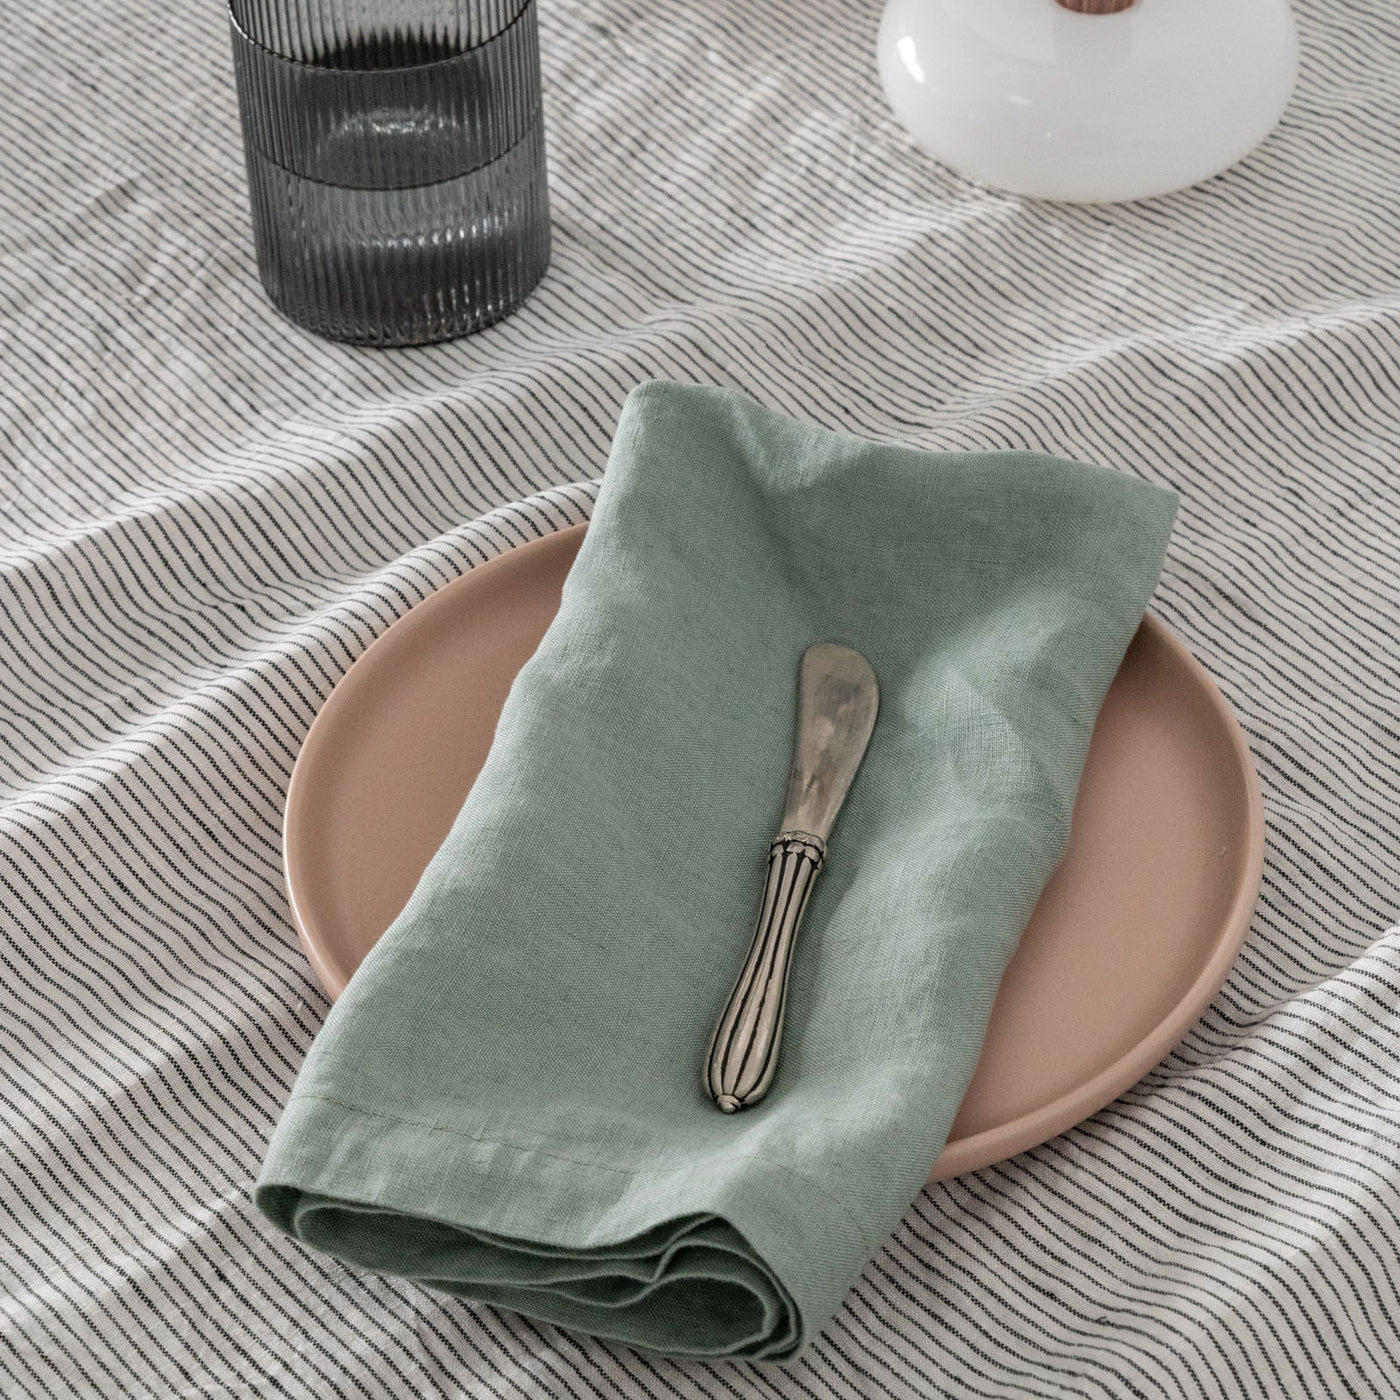 French Flax Linen Napkins (Set Of 4) in Sage